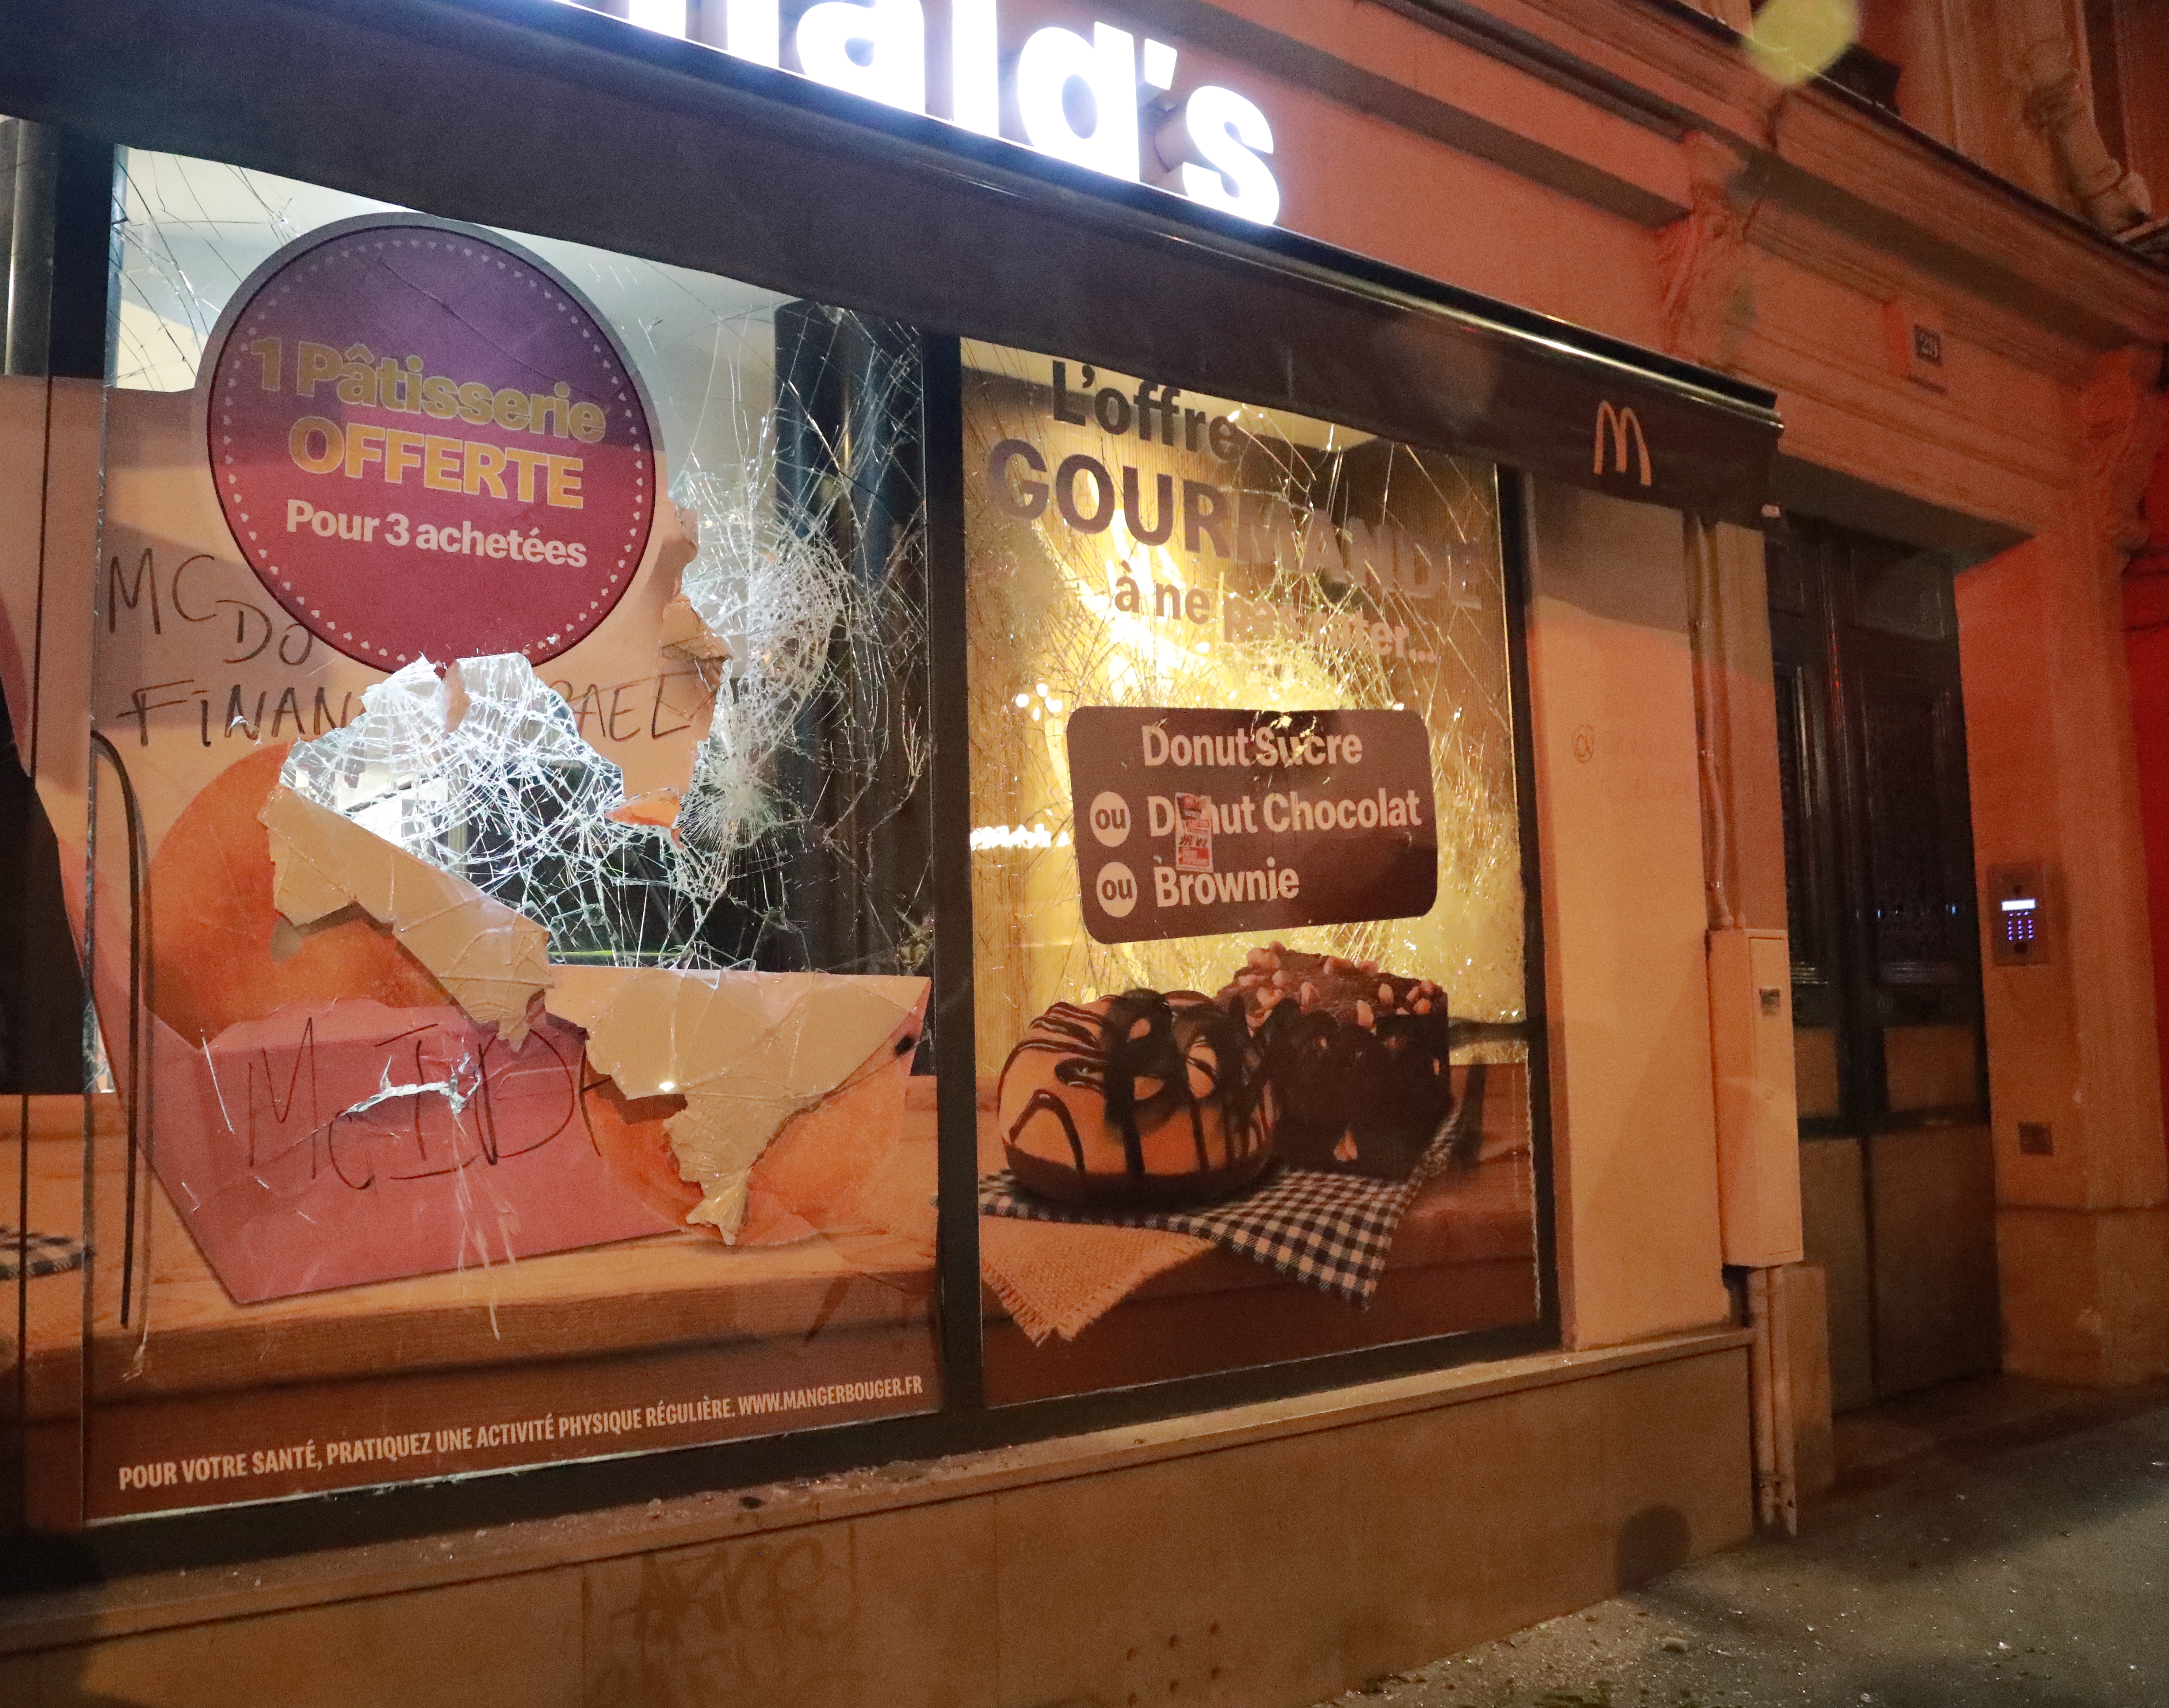 Shop windows were smashed as rioters clashed with cops